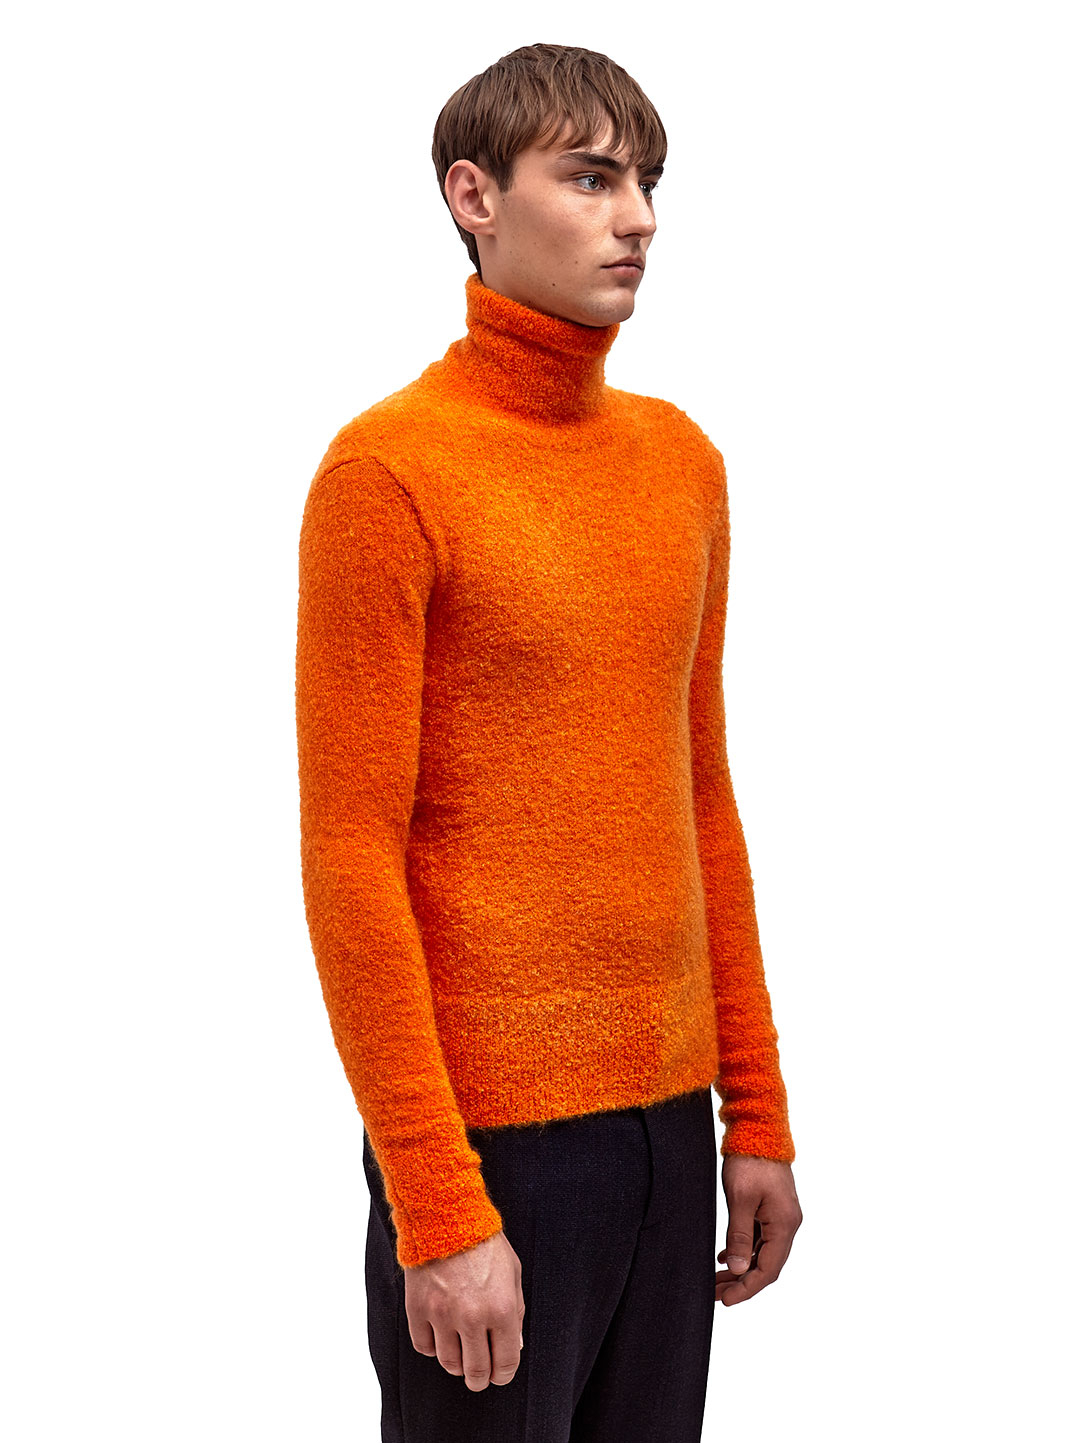 Lyst - Raf simons / Sterling Ruby Mens Knitted Narrow Fit Roll-Neck ...